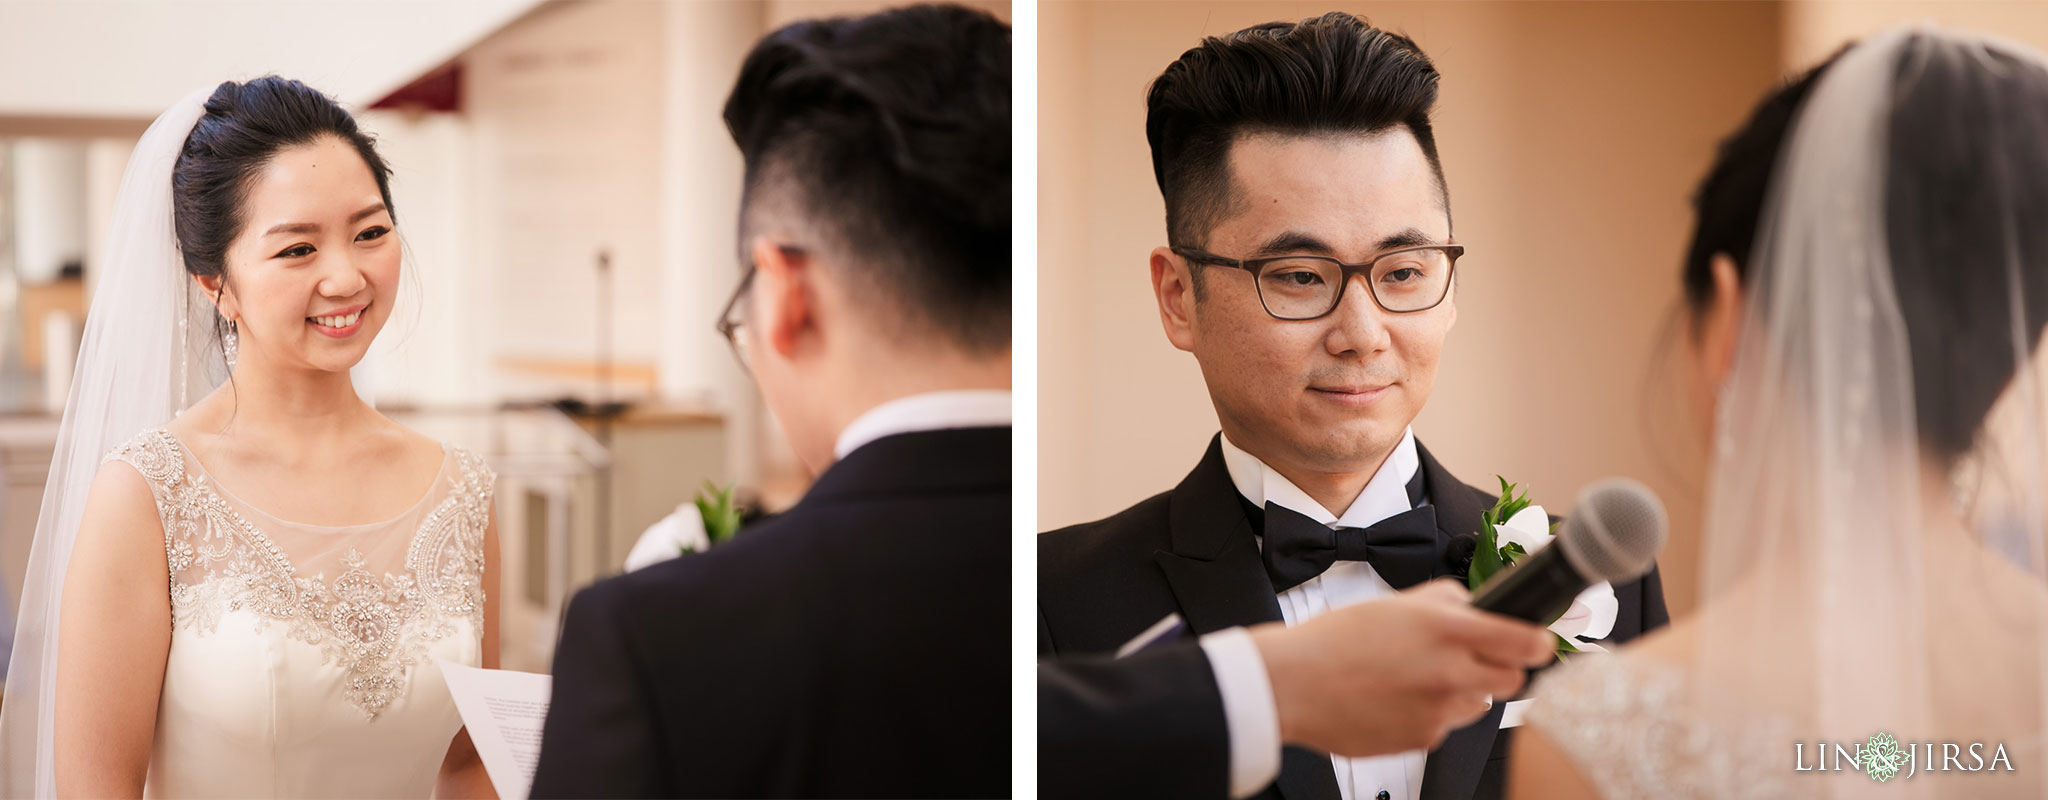 25 segerstrom center for the arts costa mesa wedding photography